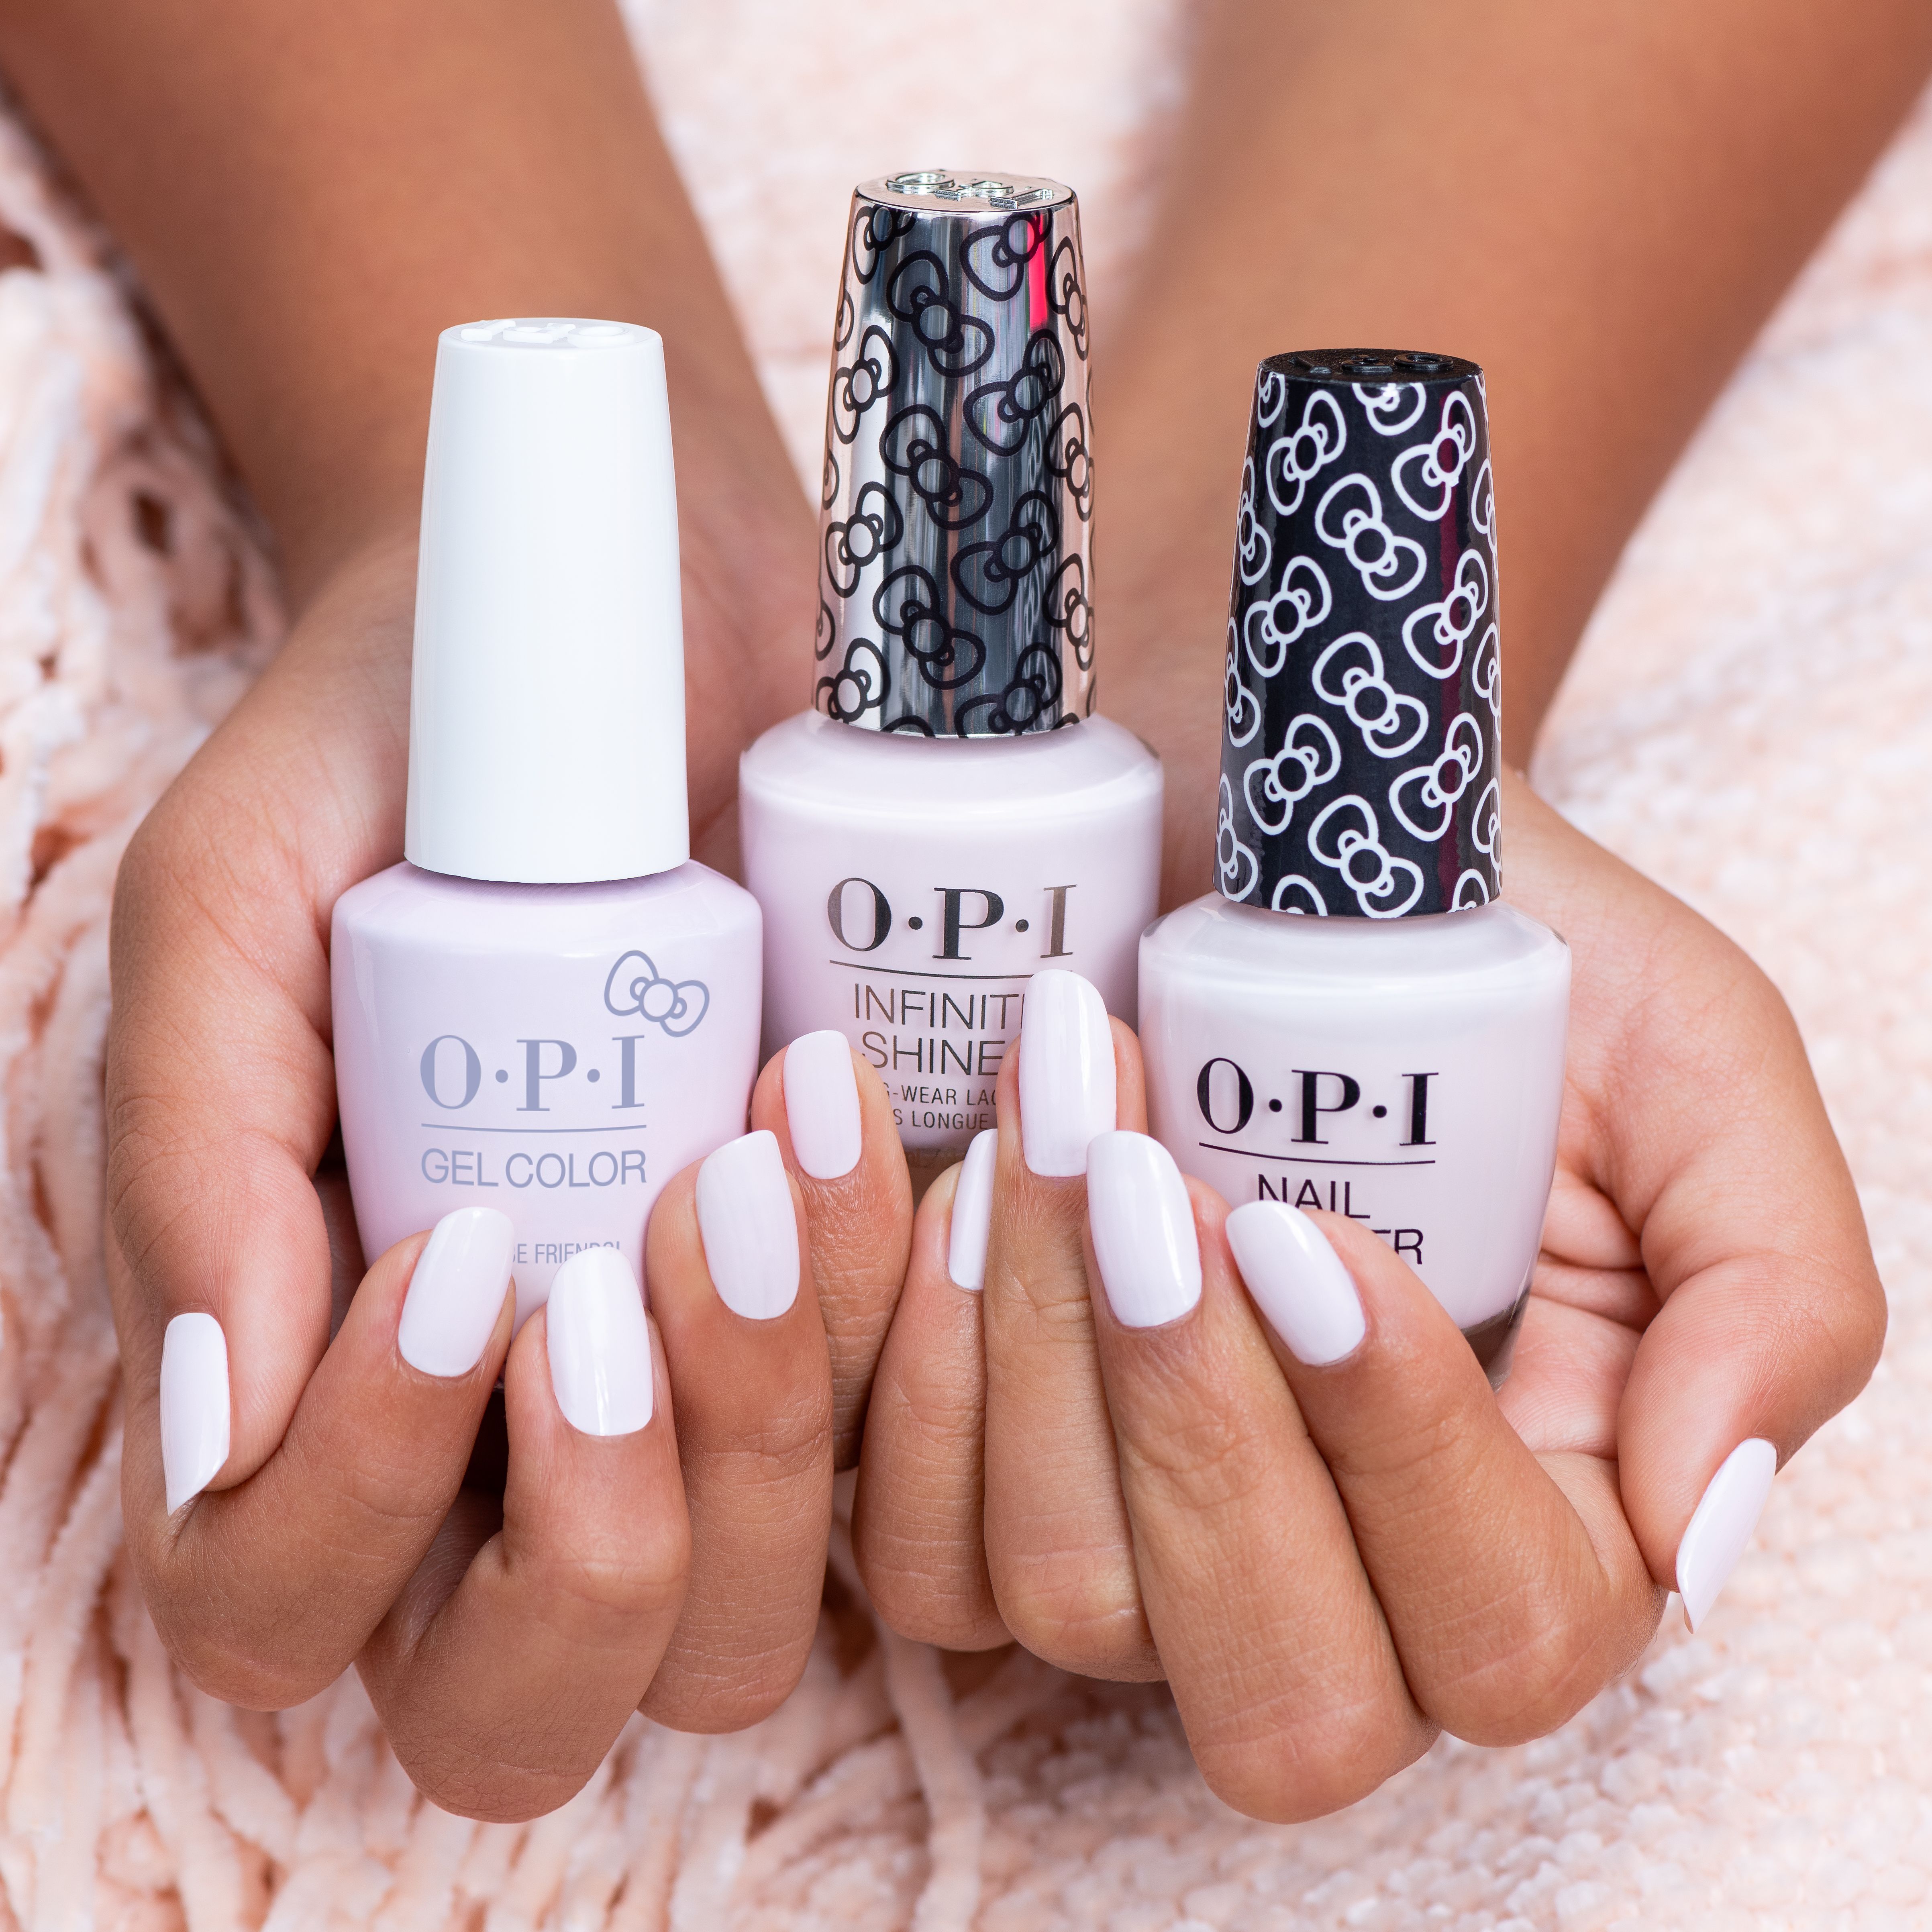 Whether You Choose Opi Nail Lacquer Opi Infinite Shine Or Opi Gel Color It Doesn T Matter Let S Be Friends Forever A Fall Gel Nails Nails Gel Nail Colors